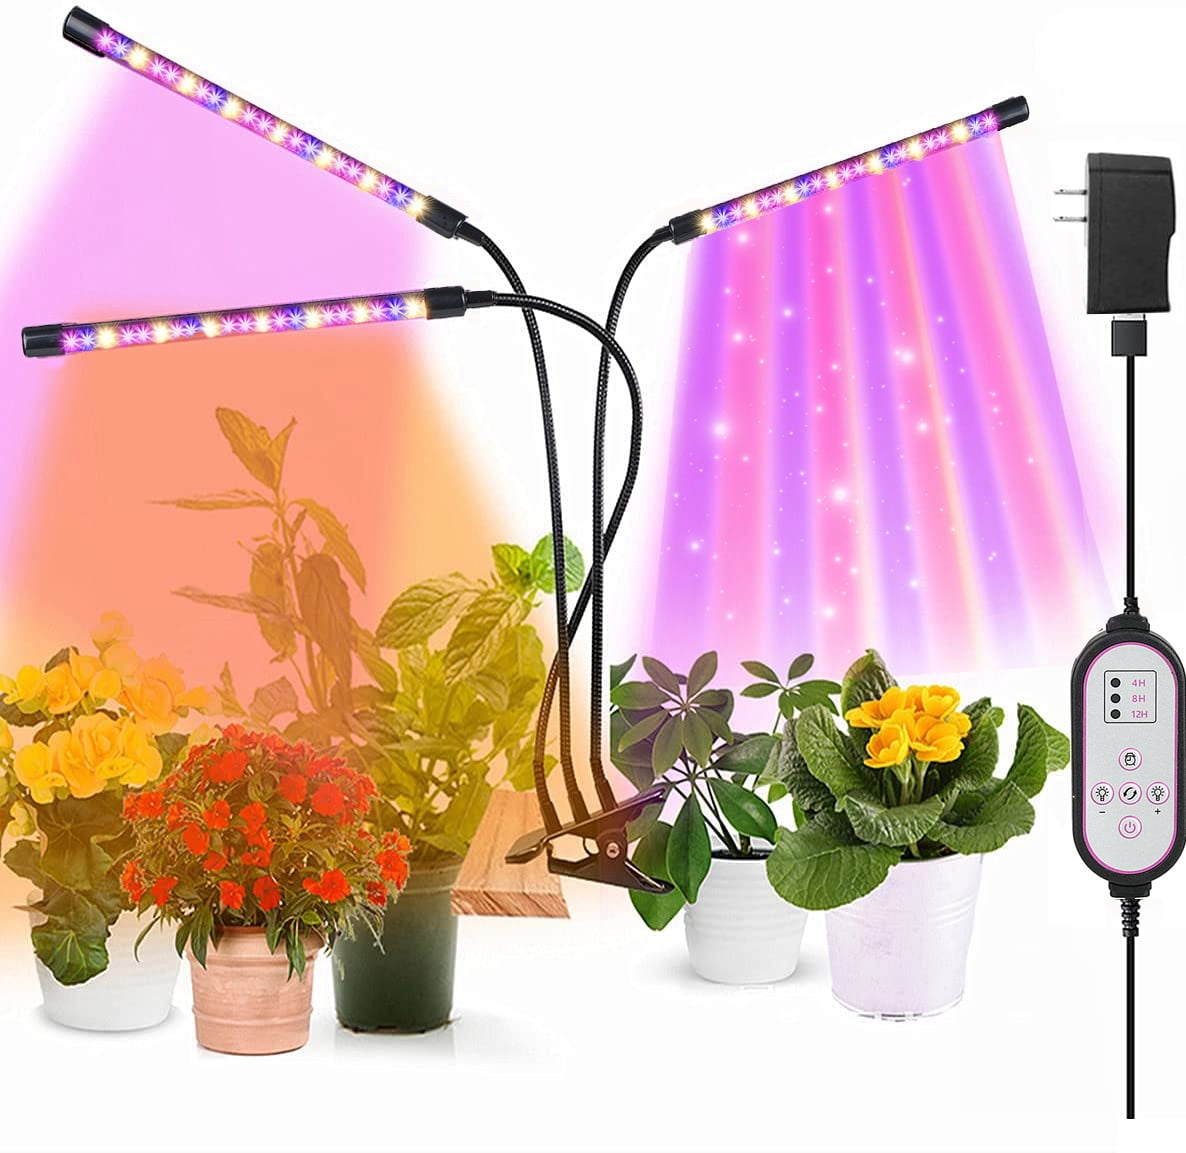 LaMuVii Upgraded 4 Arms Grow Light Full Spectrum with 3/9/12H Timer 5 Dimmable Levels Desk Plant Lamp for Greenhouse Hydroponics Succulent Flower Plant Light for Indoor Plants 